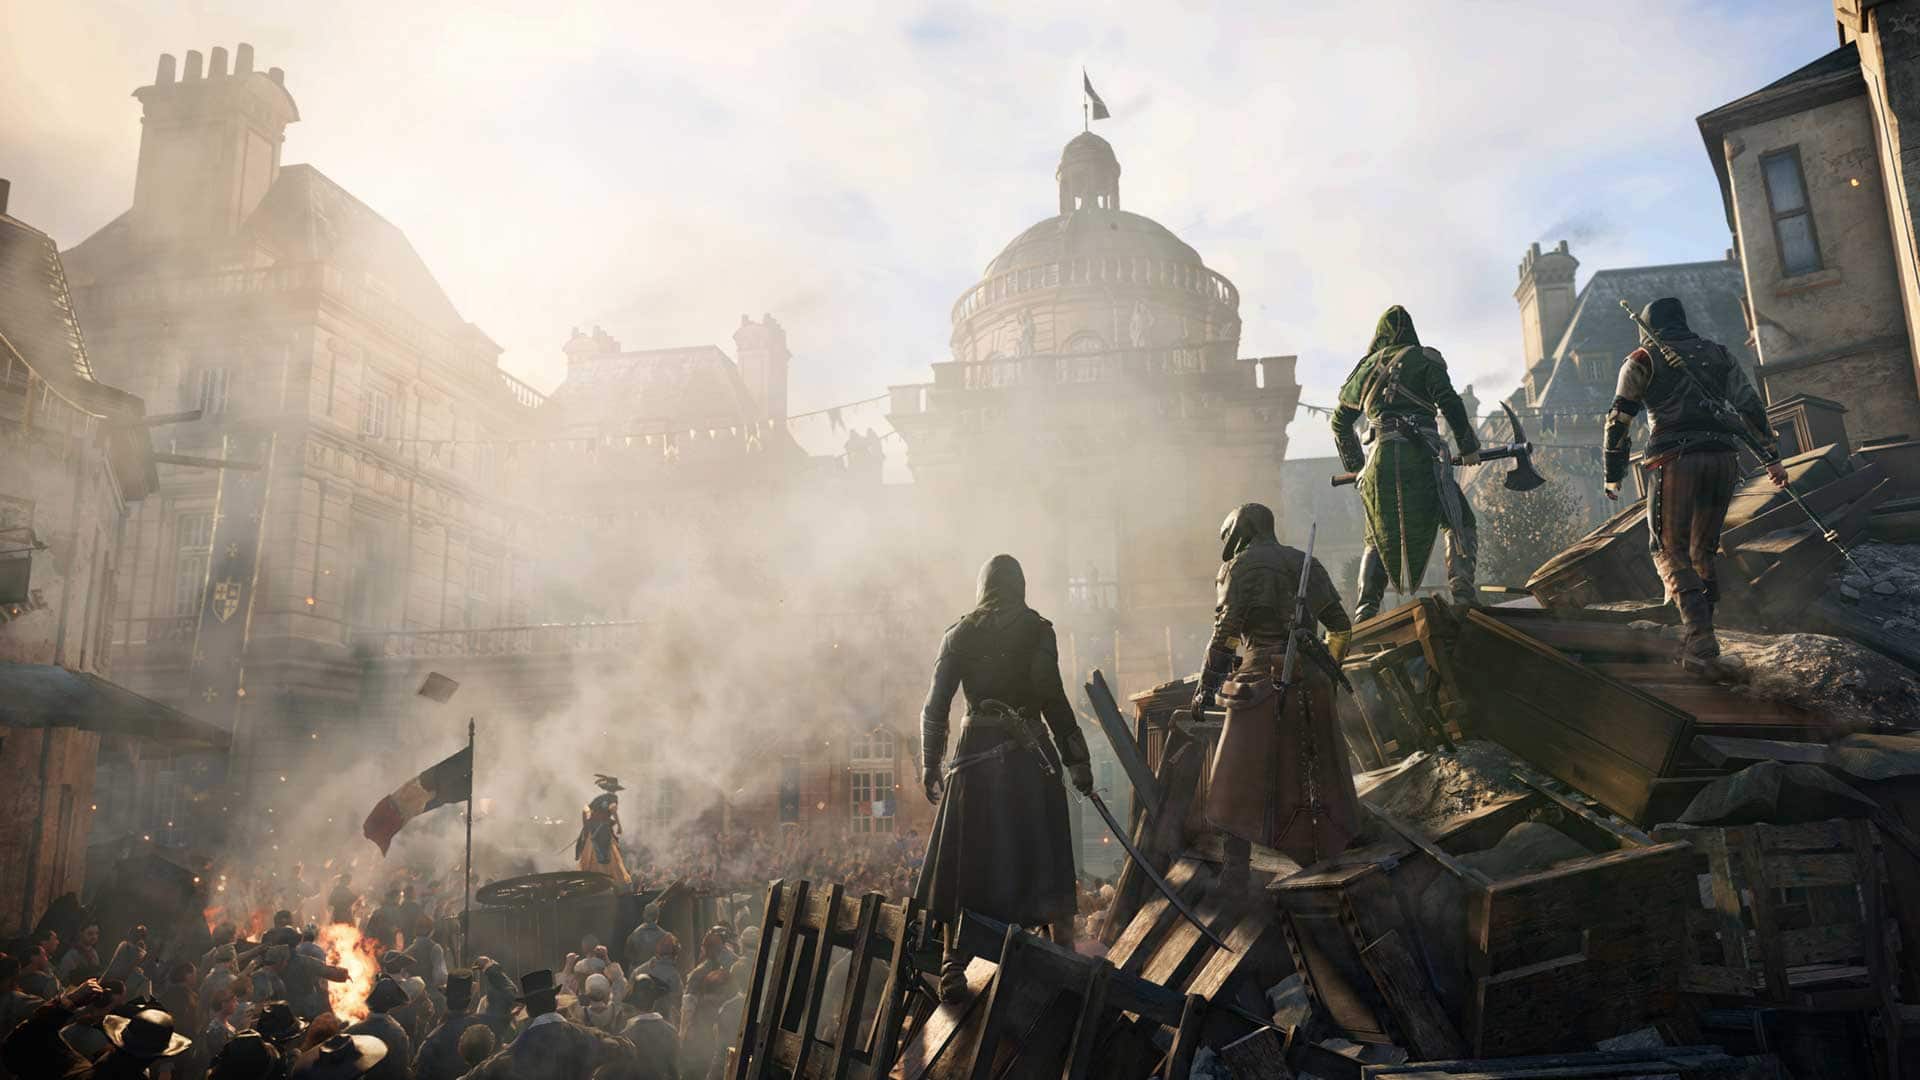 Ubisoft Had To Increase Their Server Capacity For Assassin’s Creed Unity After Players Poured In Following The Giveaway